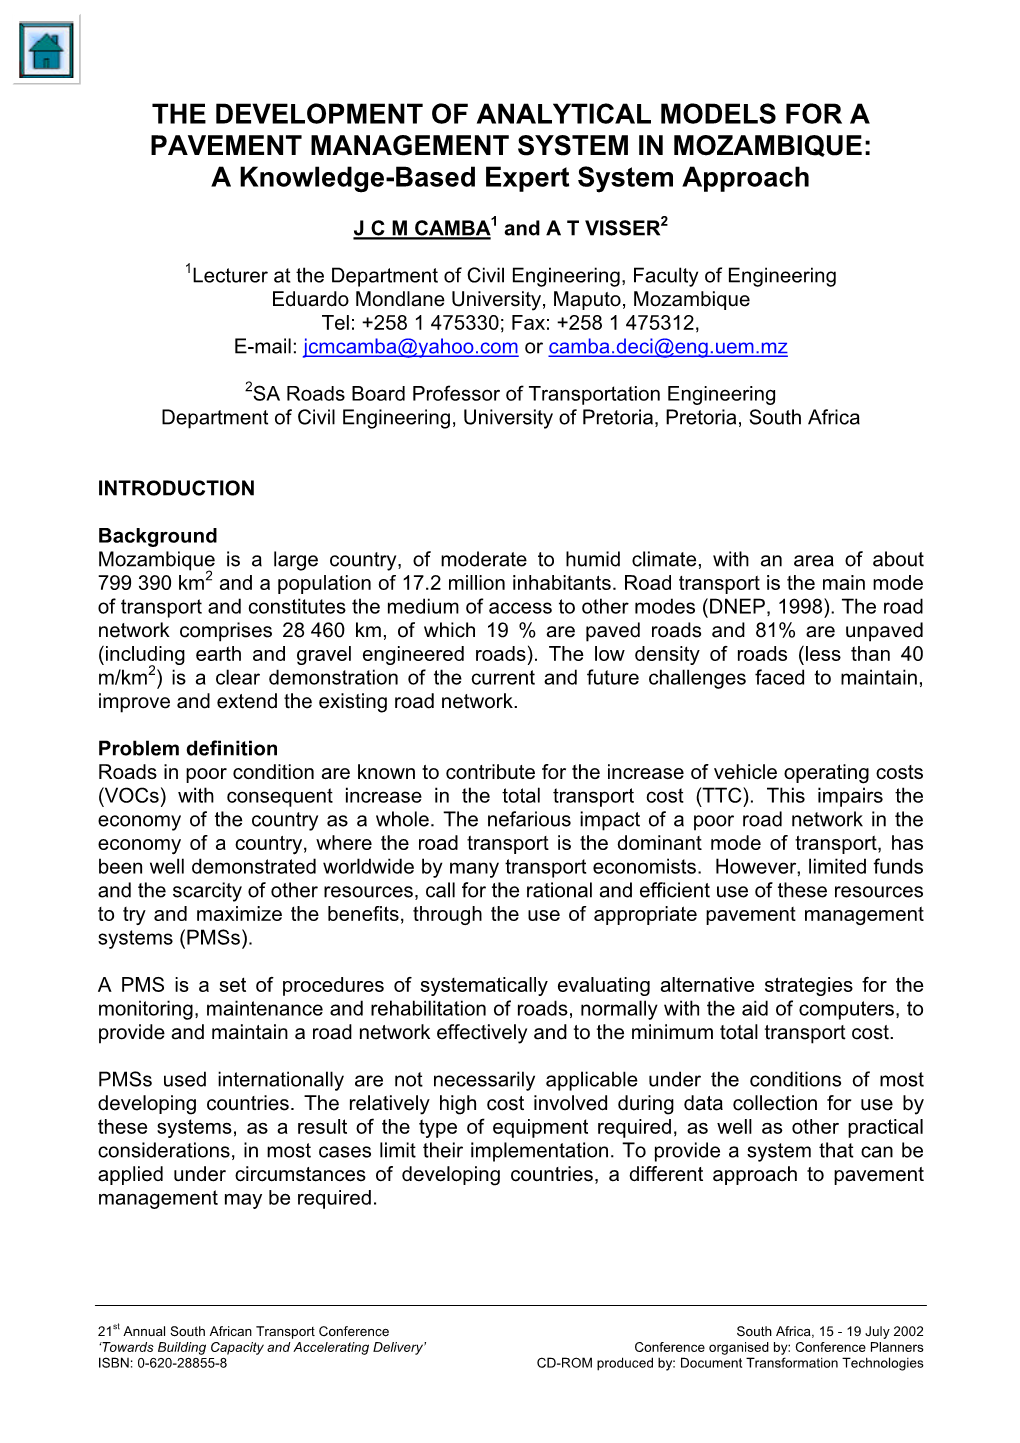 THE DEVELOPMENT of ANALYTICAL MODELS for a PAVEMENT MANAGEMENT SYSTEM in MOZAMBIQUE: a Knowledge-Based Expert System Approach